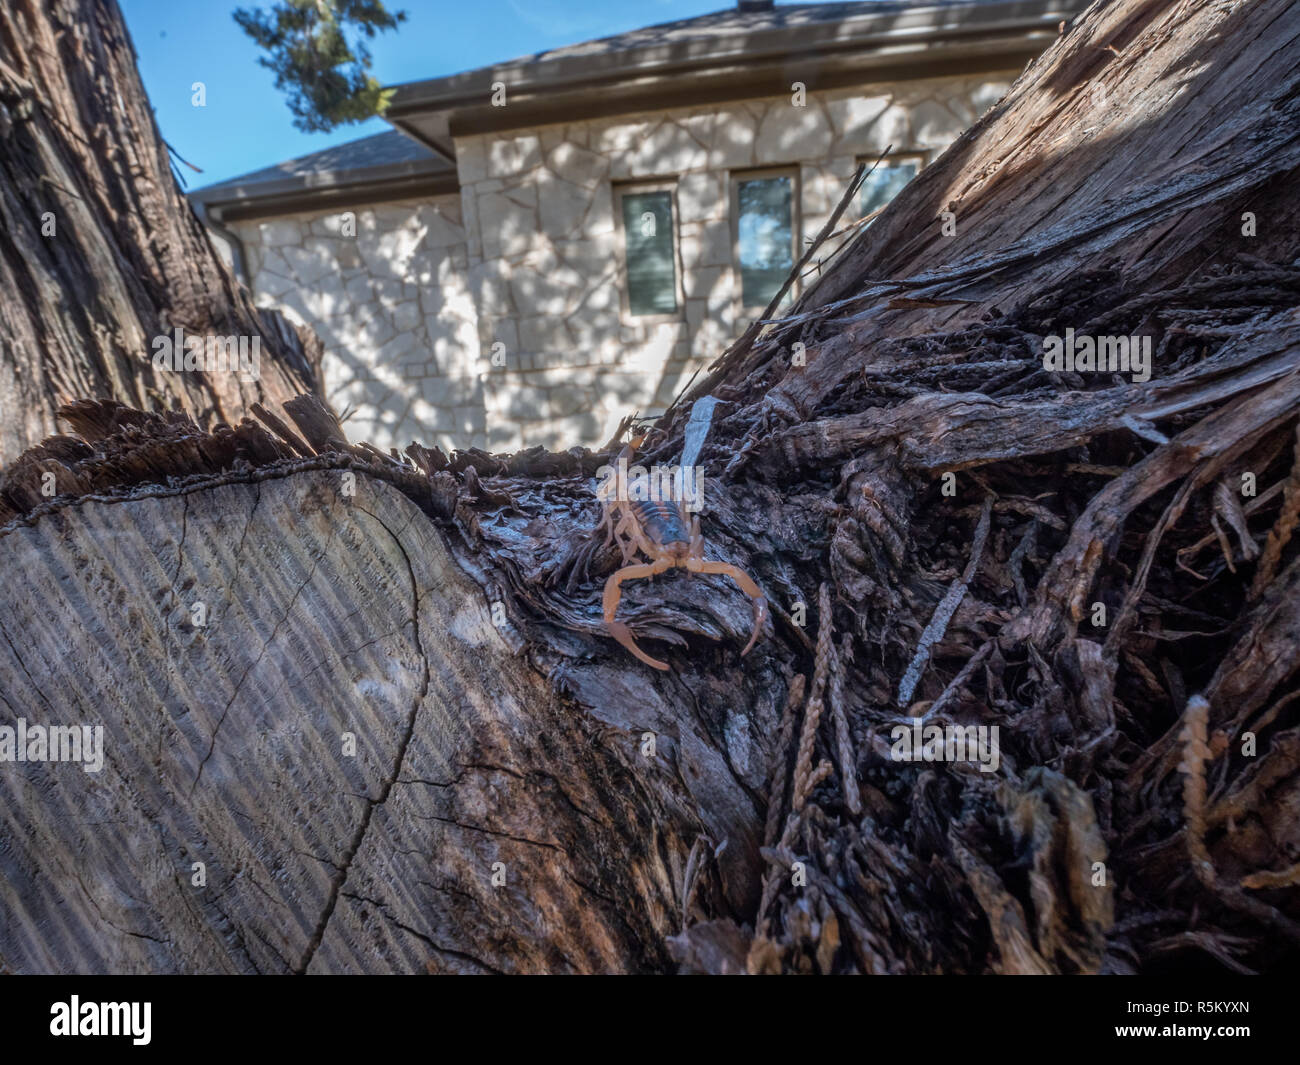 Front View of Scopio on a Cedar Tree With Residential ouse in the background Stock Photo